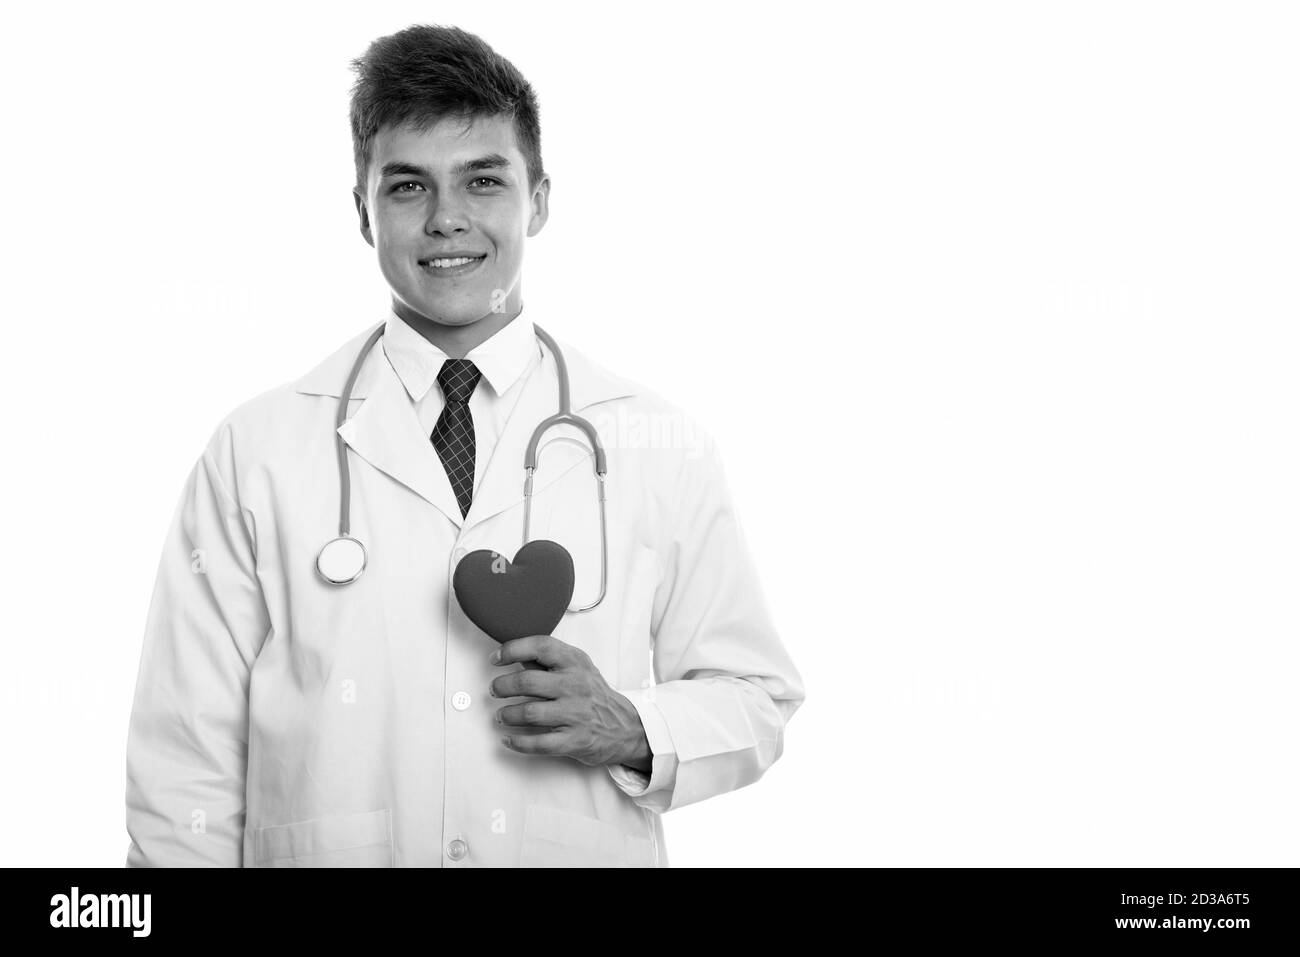 Studio shot of young happy man doctor smiling while holding red heart Stock Photo